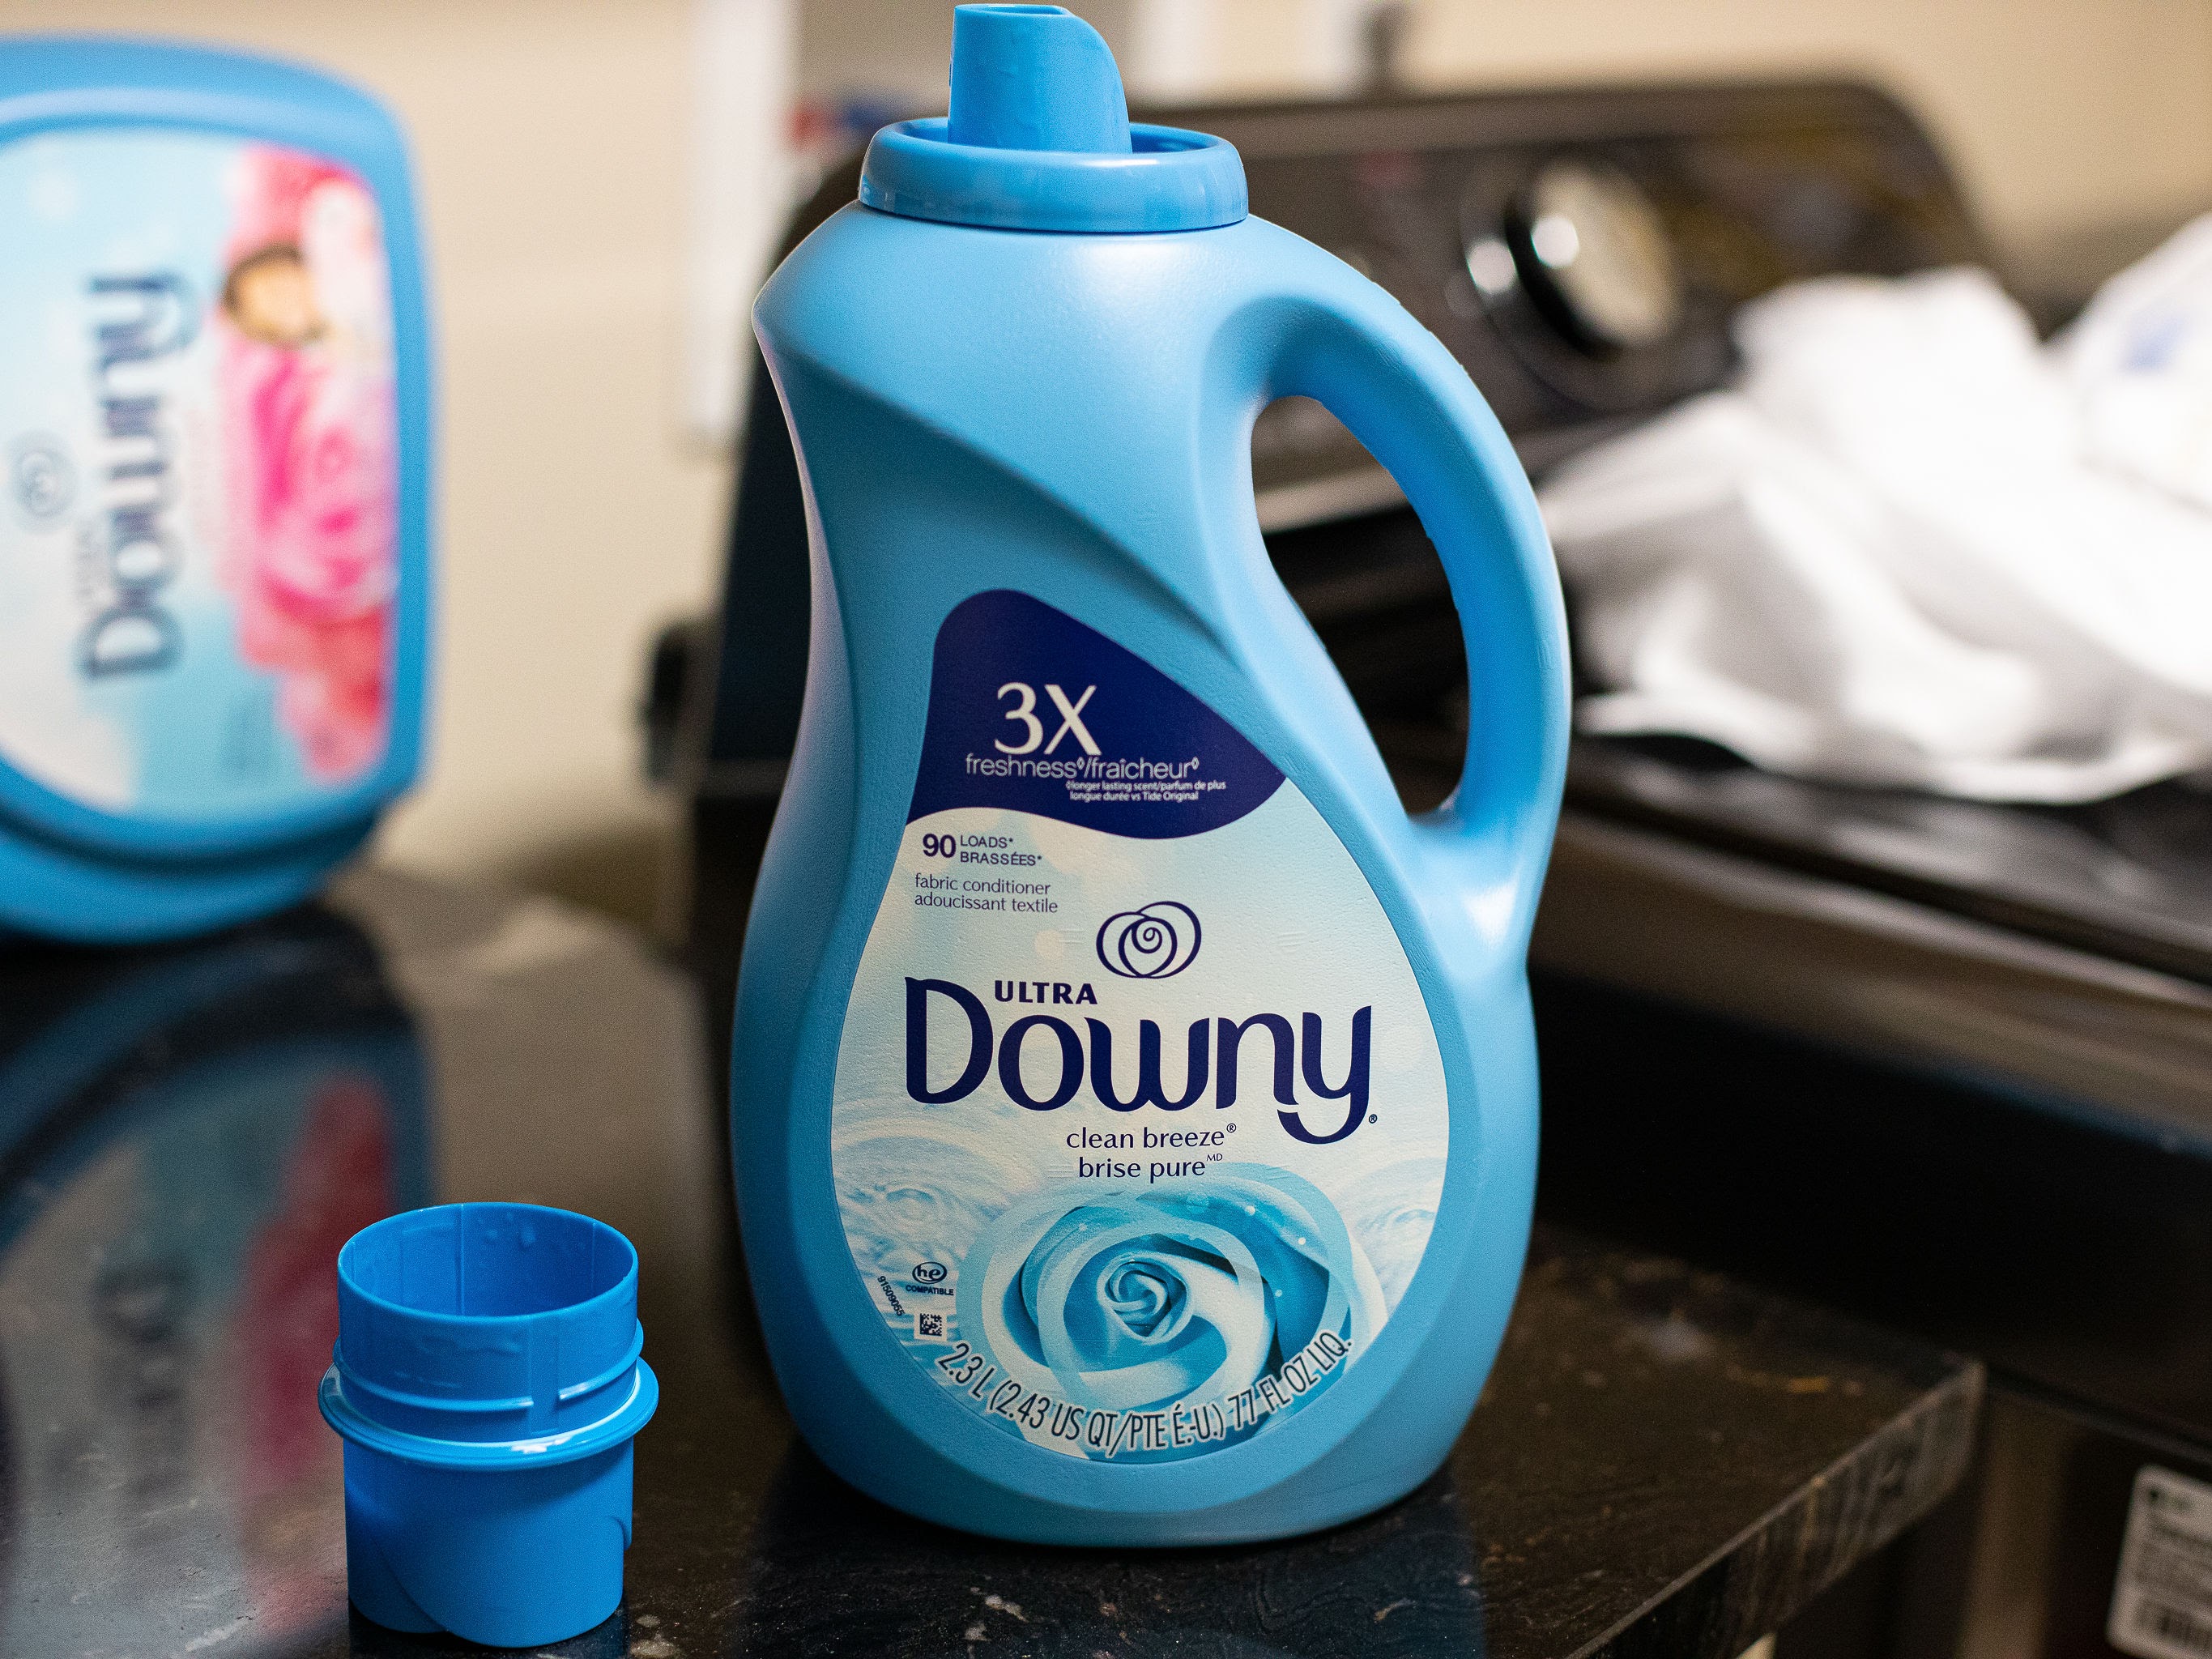 Downy Fabric Softener As Low As $4.99 At Publix (Regular Price $9.25)